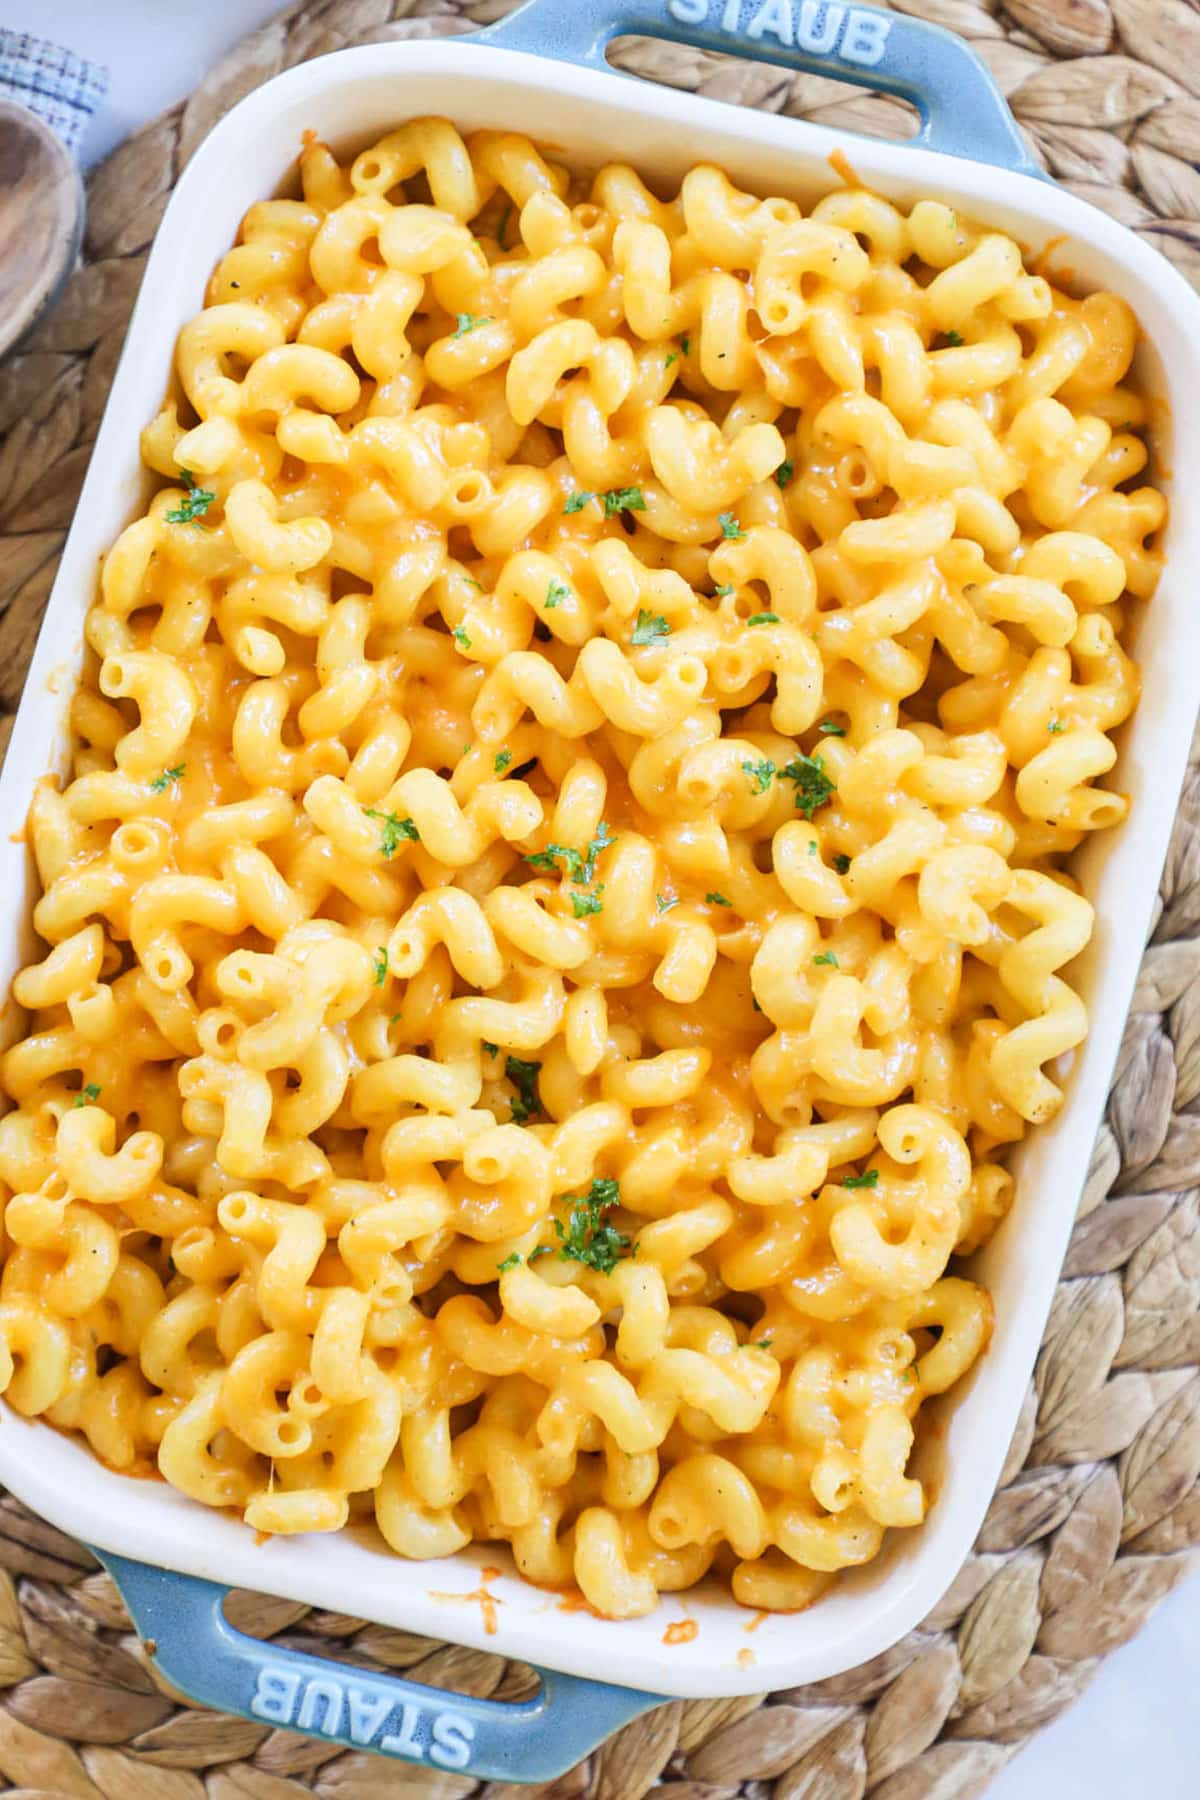 baked macaroni and cheese in a white dish